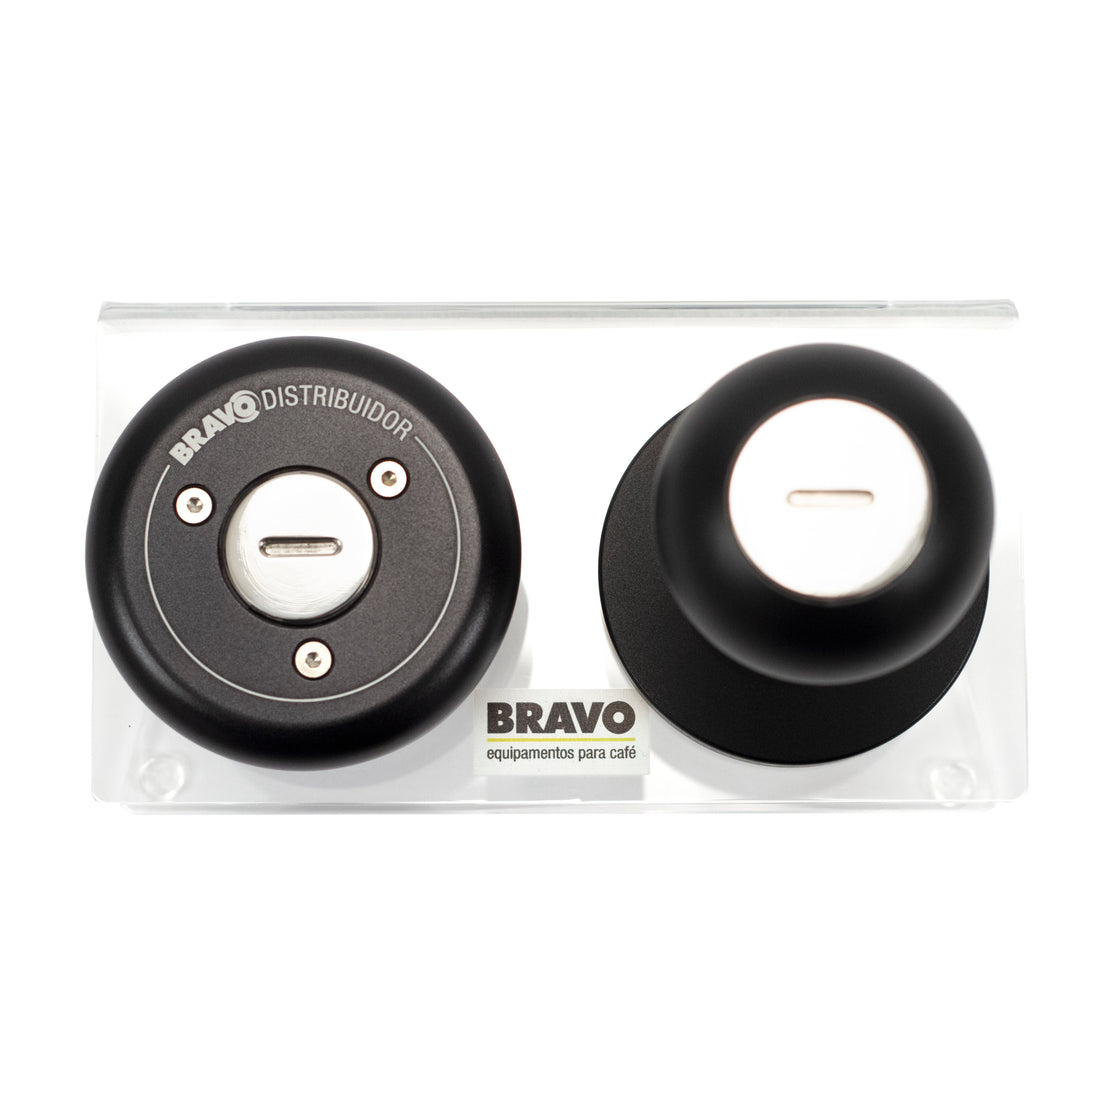 Birdseye view of the Bravo Distributor and Tamper in the Cleary Acrylic Stand.